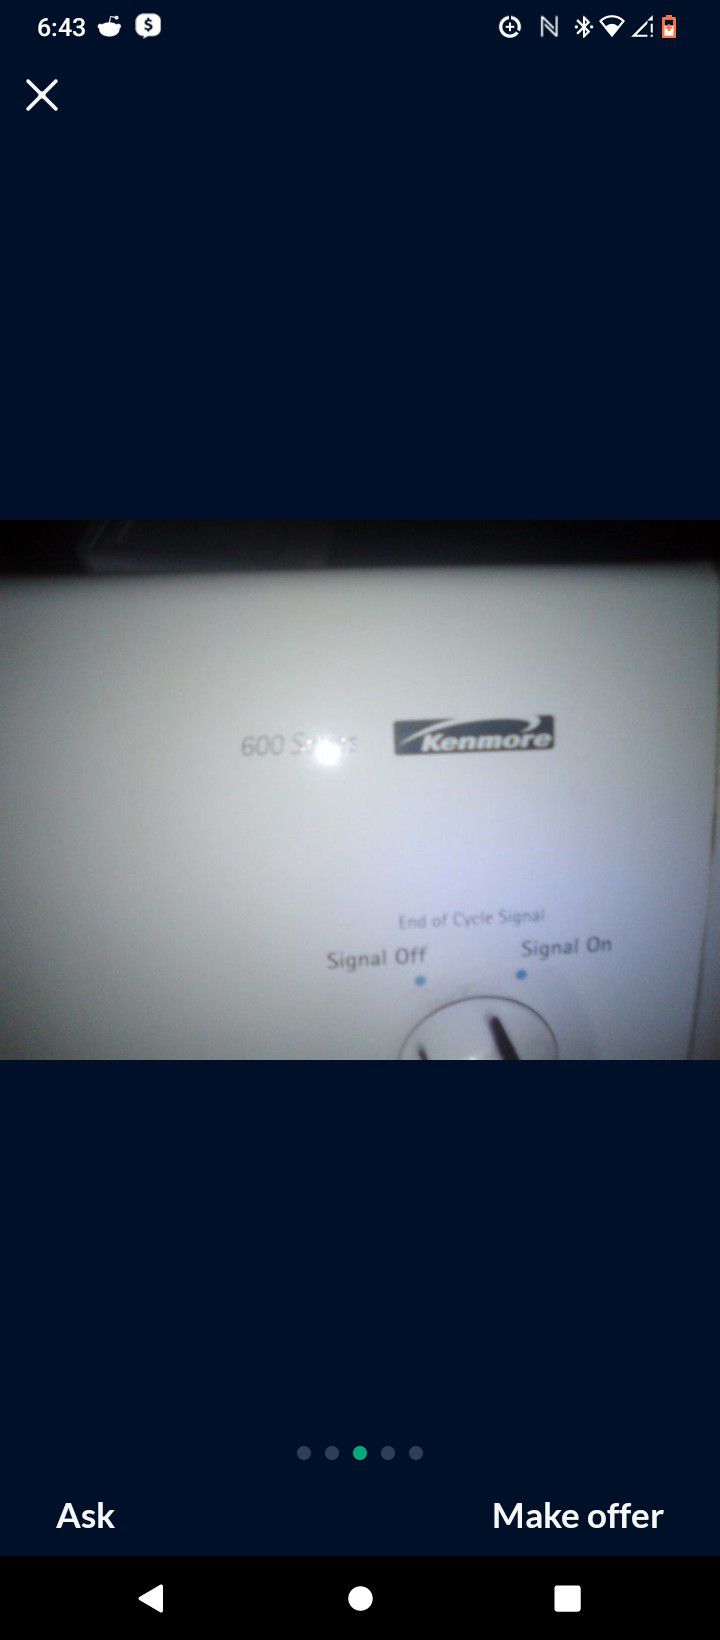 Kenmore Washer & Dryer $250 OBO 600 Series Set with laundry tub